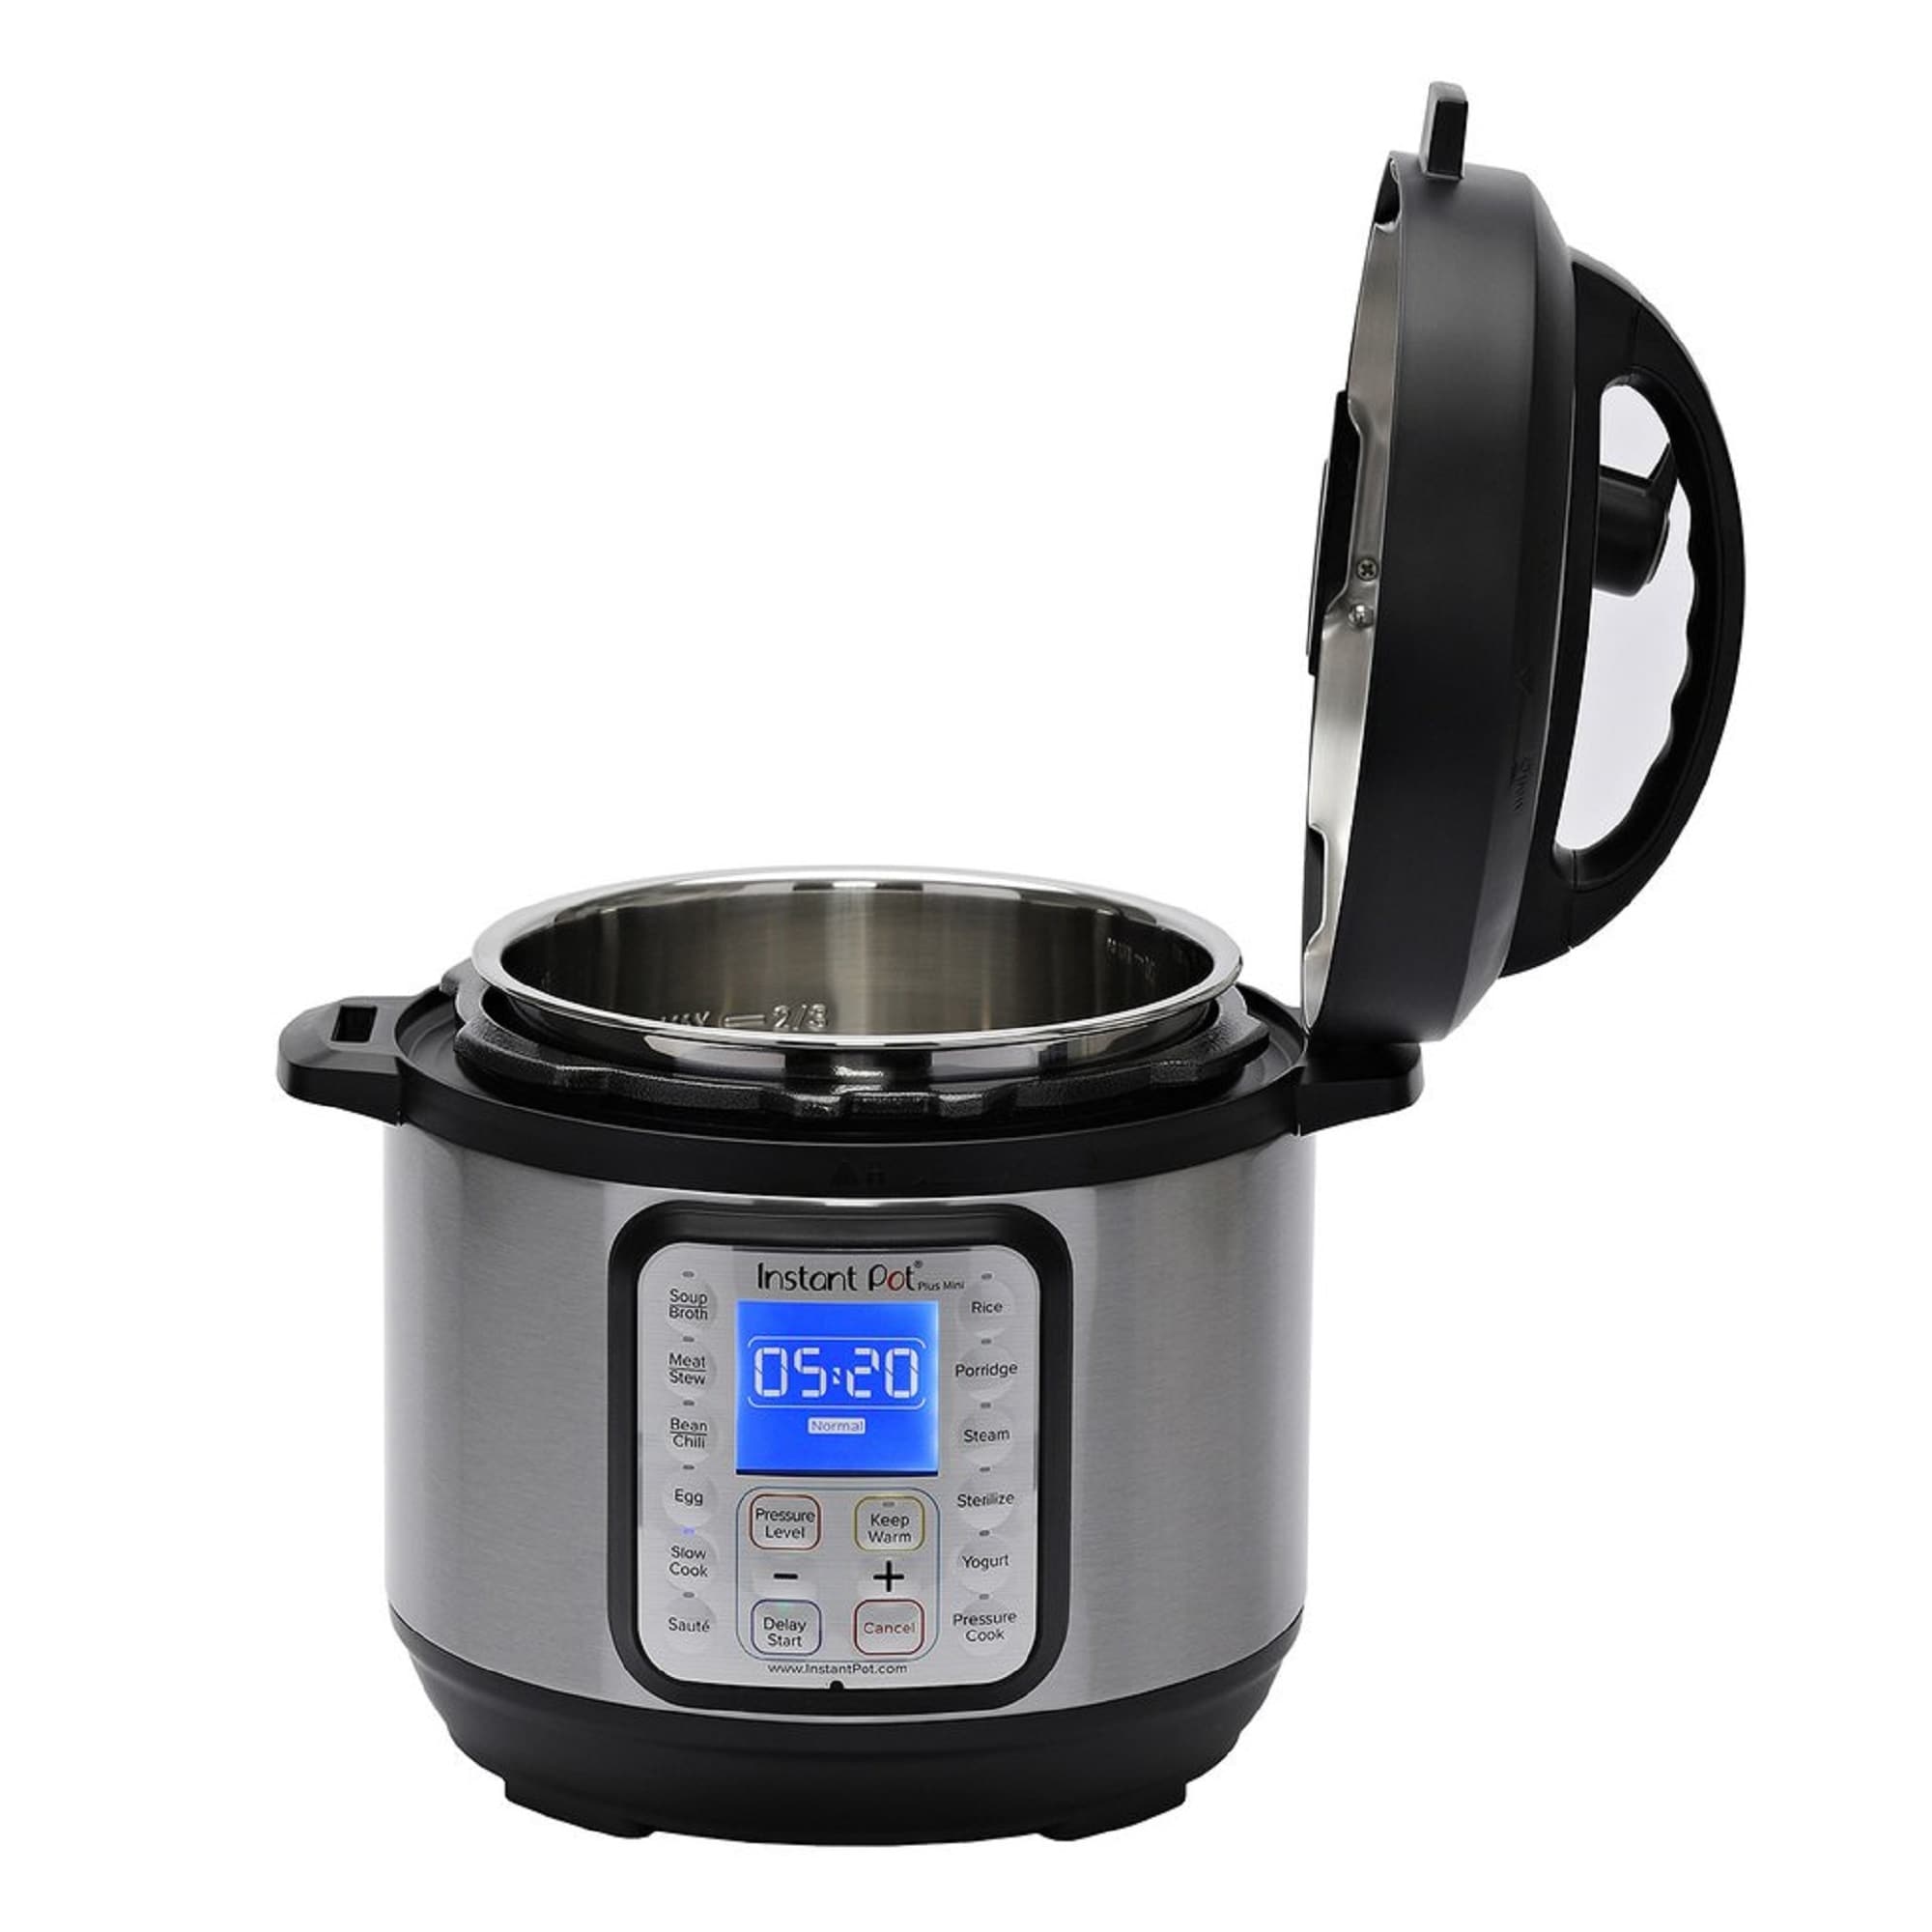 https://ak1.ostkcdn.com/images/products/is/images/direct/ae7adad0904fdbb76133c8921f415ff1b6c0e1dd/Instant-Pot-DUO-Plus-3-Qt-9-in-1-Programmable-Pressure-Cooker.jpg